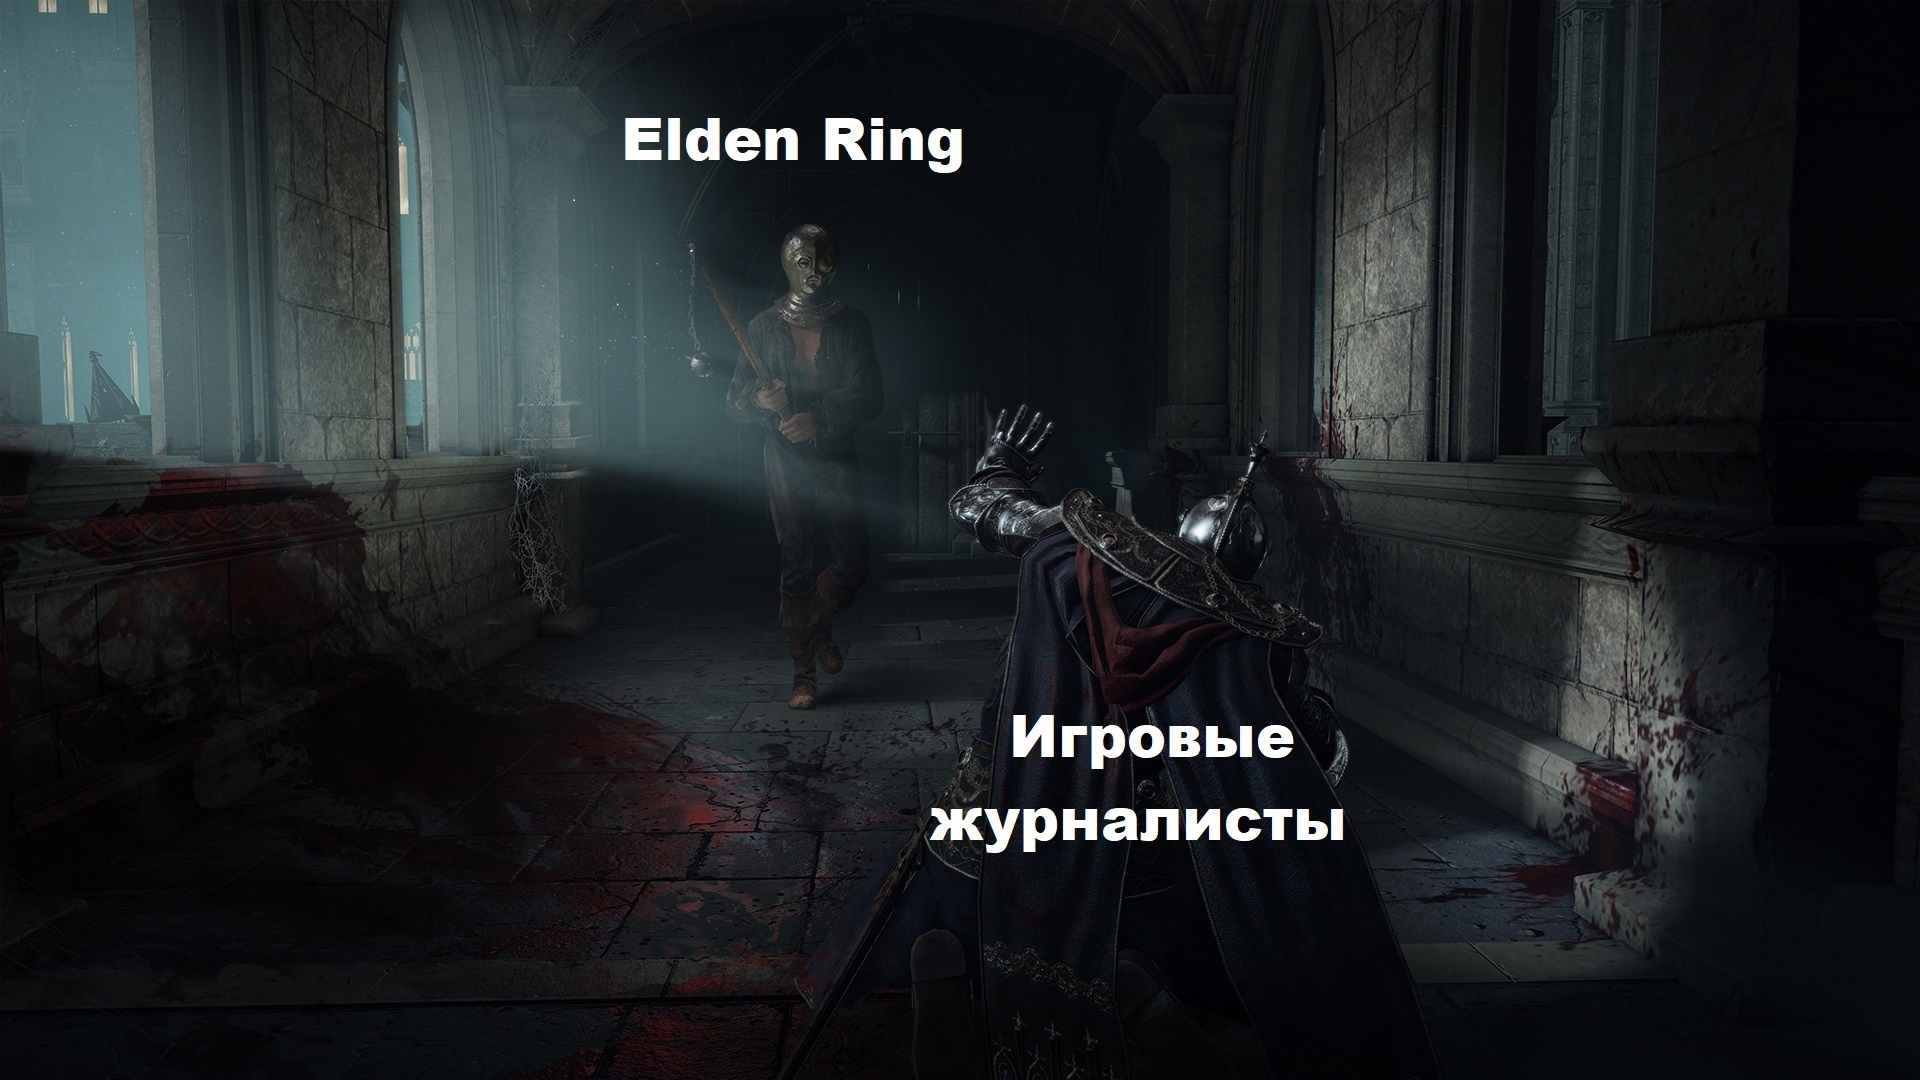 The rings coming home. Элден ринг мемы. Elden Ring ДЛС когда выйдет. Elden Ring юмор. Elden Ring какой комп нужен.